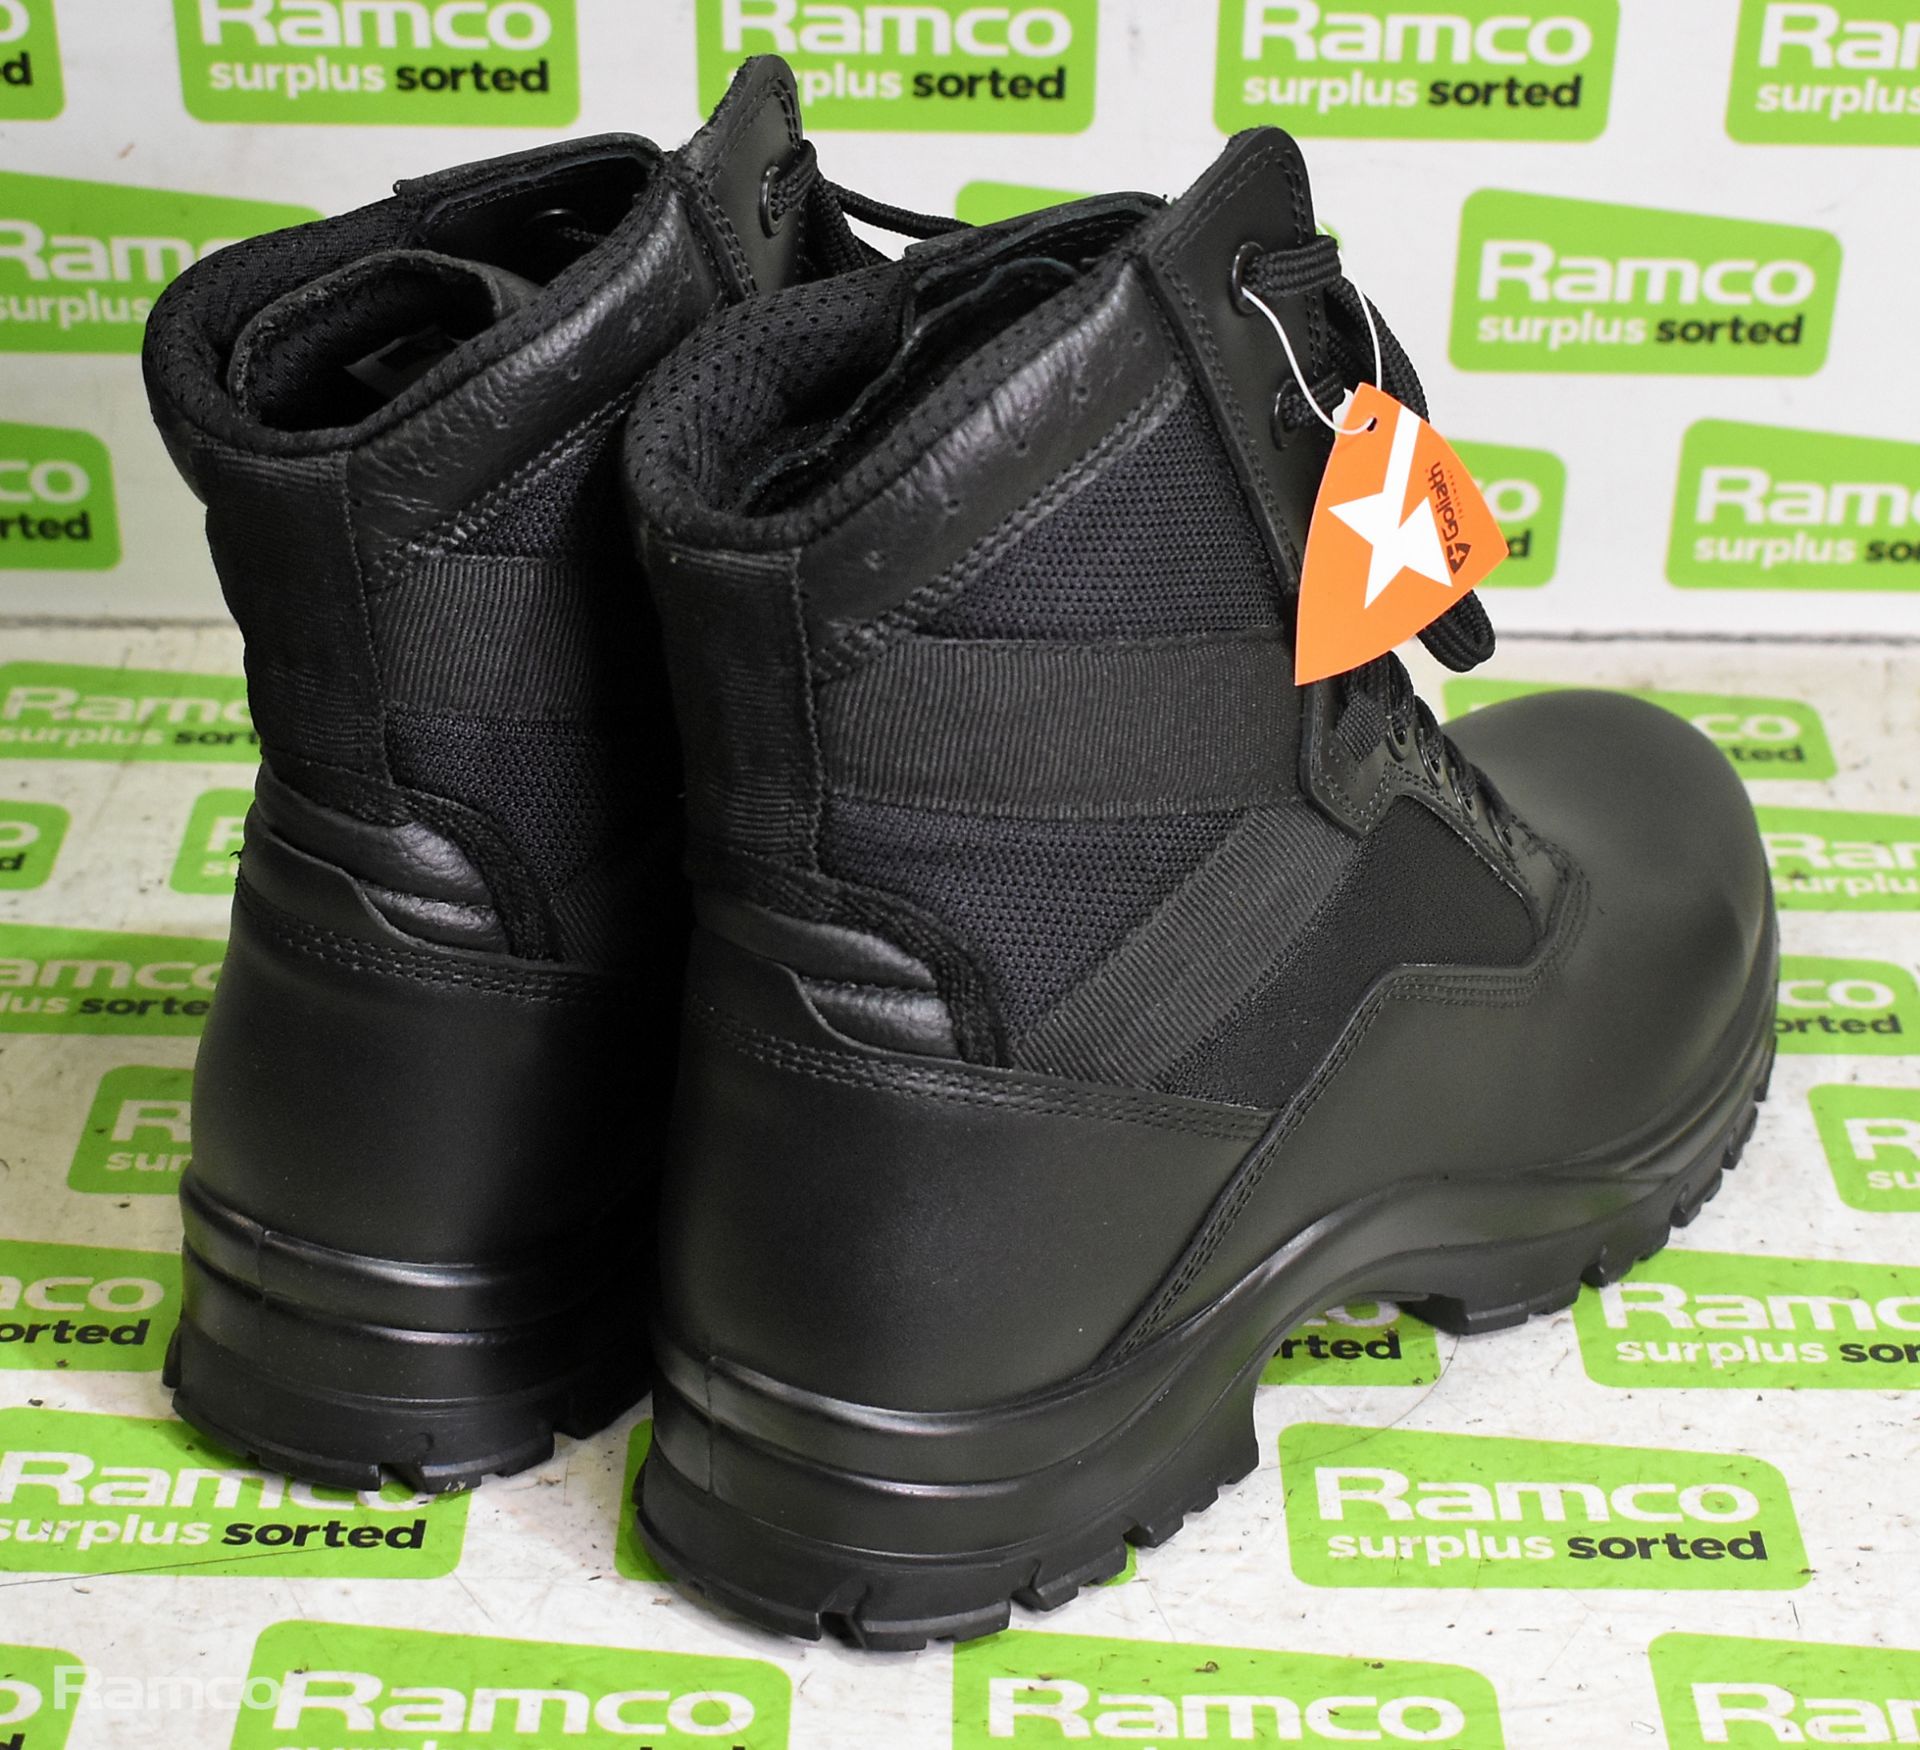 4x pairs of Goliath warm weather boots - Size 9L - Image 3 of 6